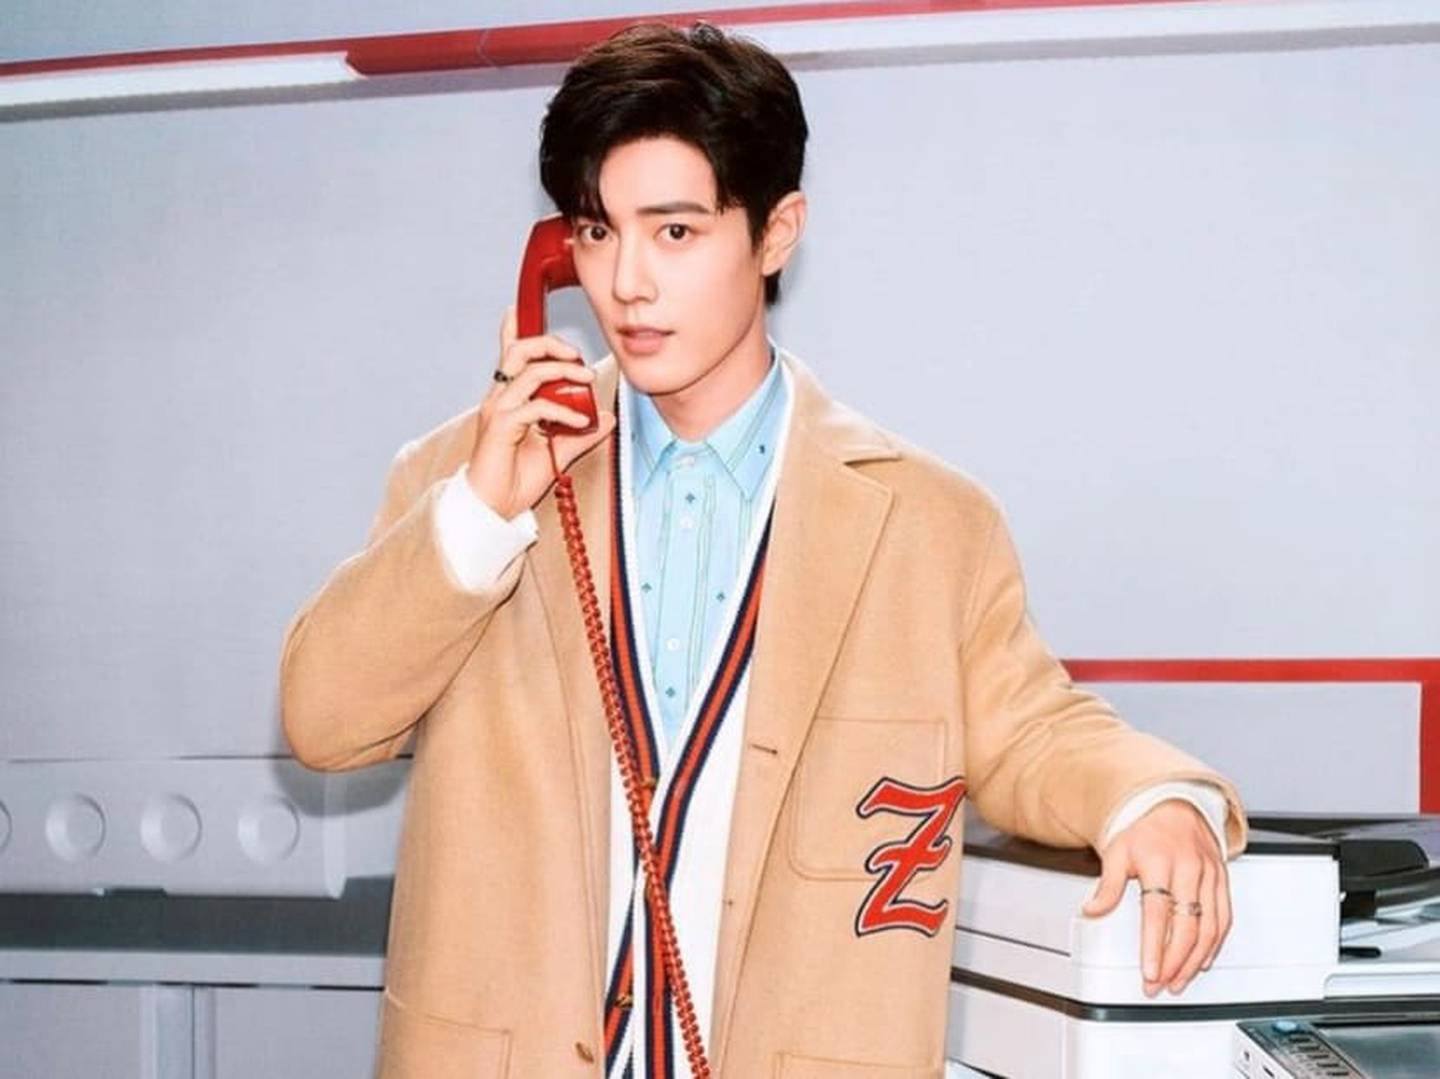 An image of Xiao Zhan posted to Gucci's Instagram as part of the brand ambassador announcement. Gucci